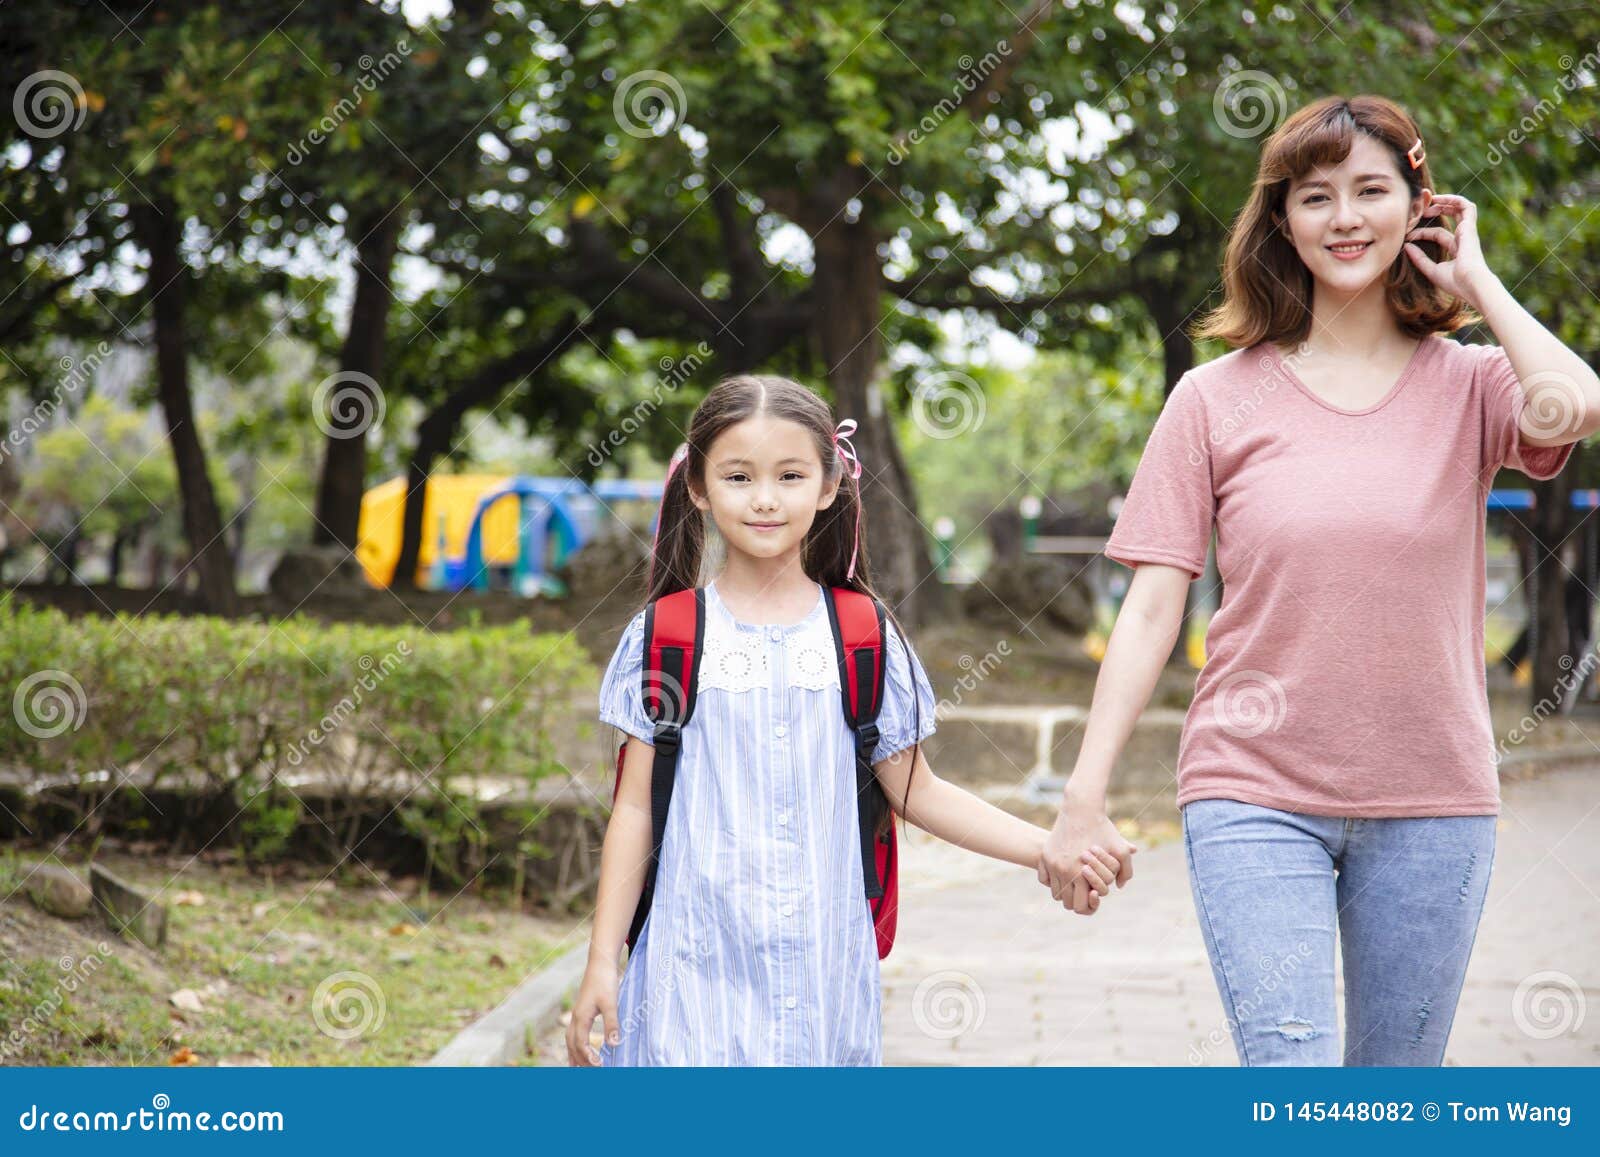 42 673 Mother Child Holding Hands Photos Free Royalty Free Stock Photos From Dreamstime